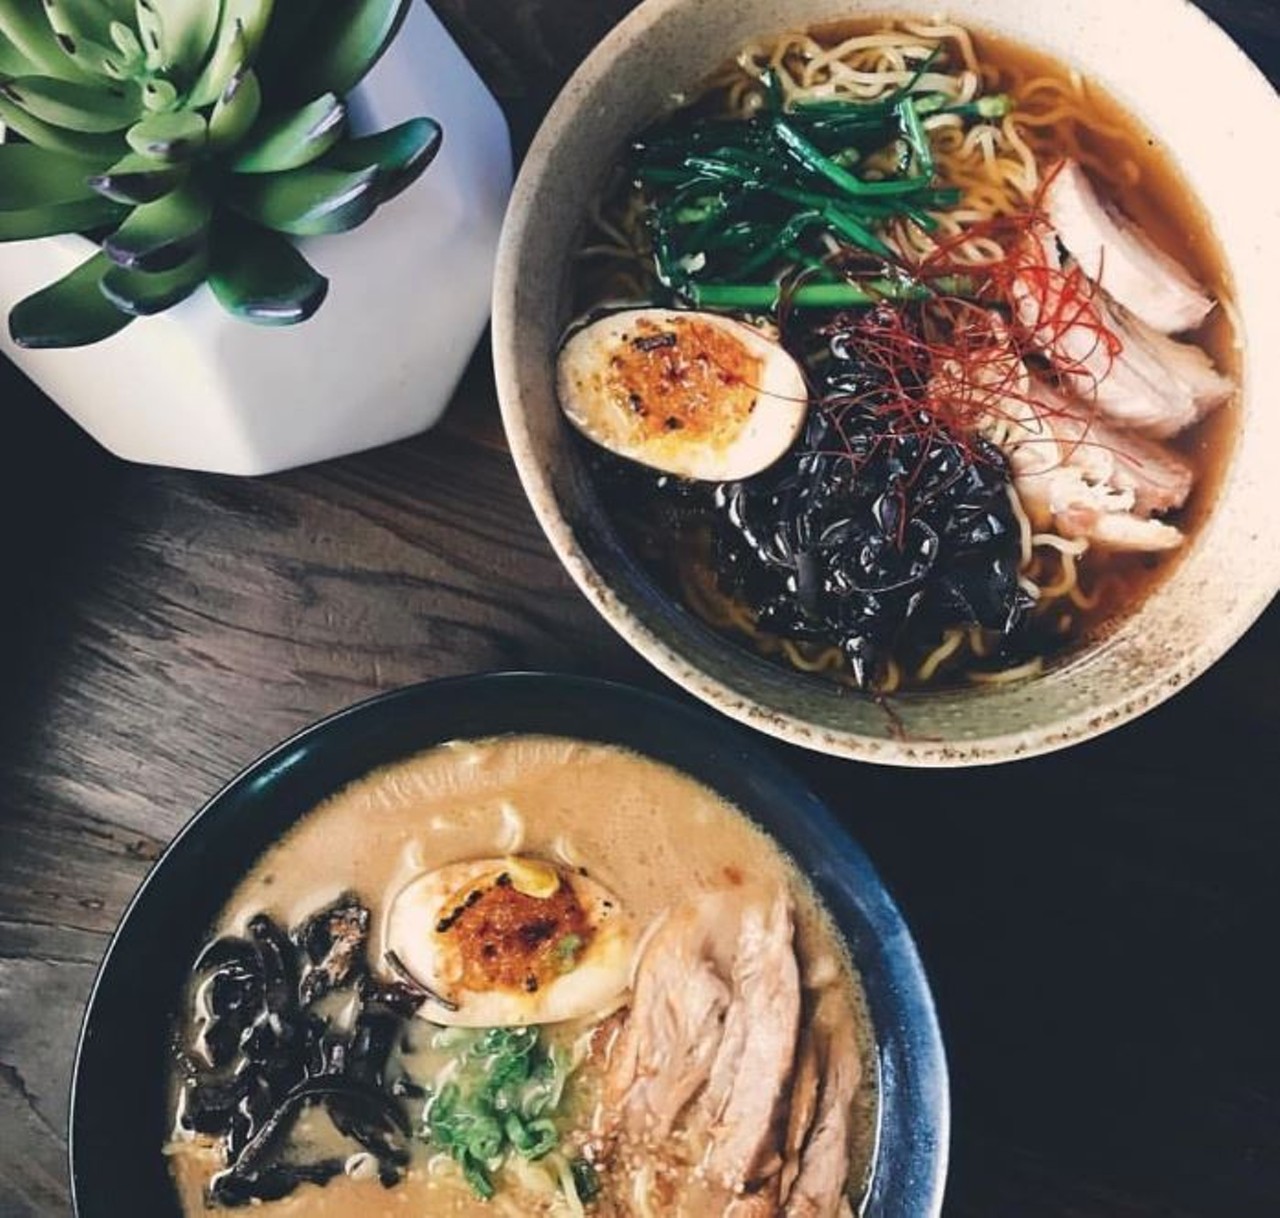 Domu
252 N. Park Ave, Winter Park | (407) 628-8651
Domu is known for its house made ramen noodles and Asian small plates, serving both brunch and dinner. The line can be unrelenting, though, as even famous singer Sam Smith wasn&#146;t spared the wait when he visited Orlando.
Photo via Domu/Facebook